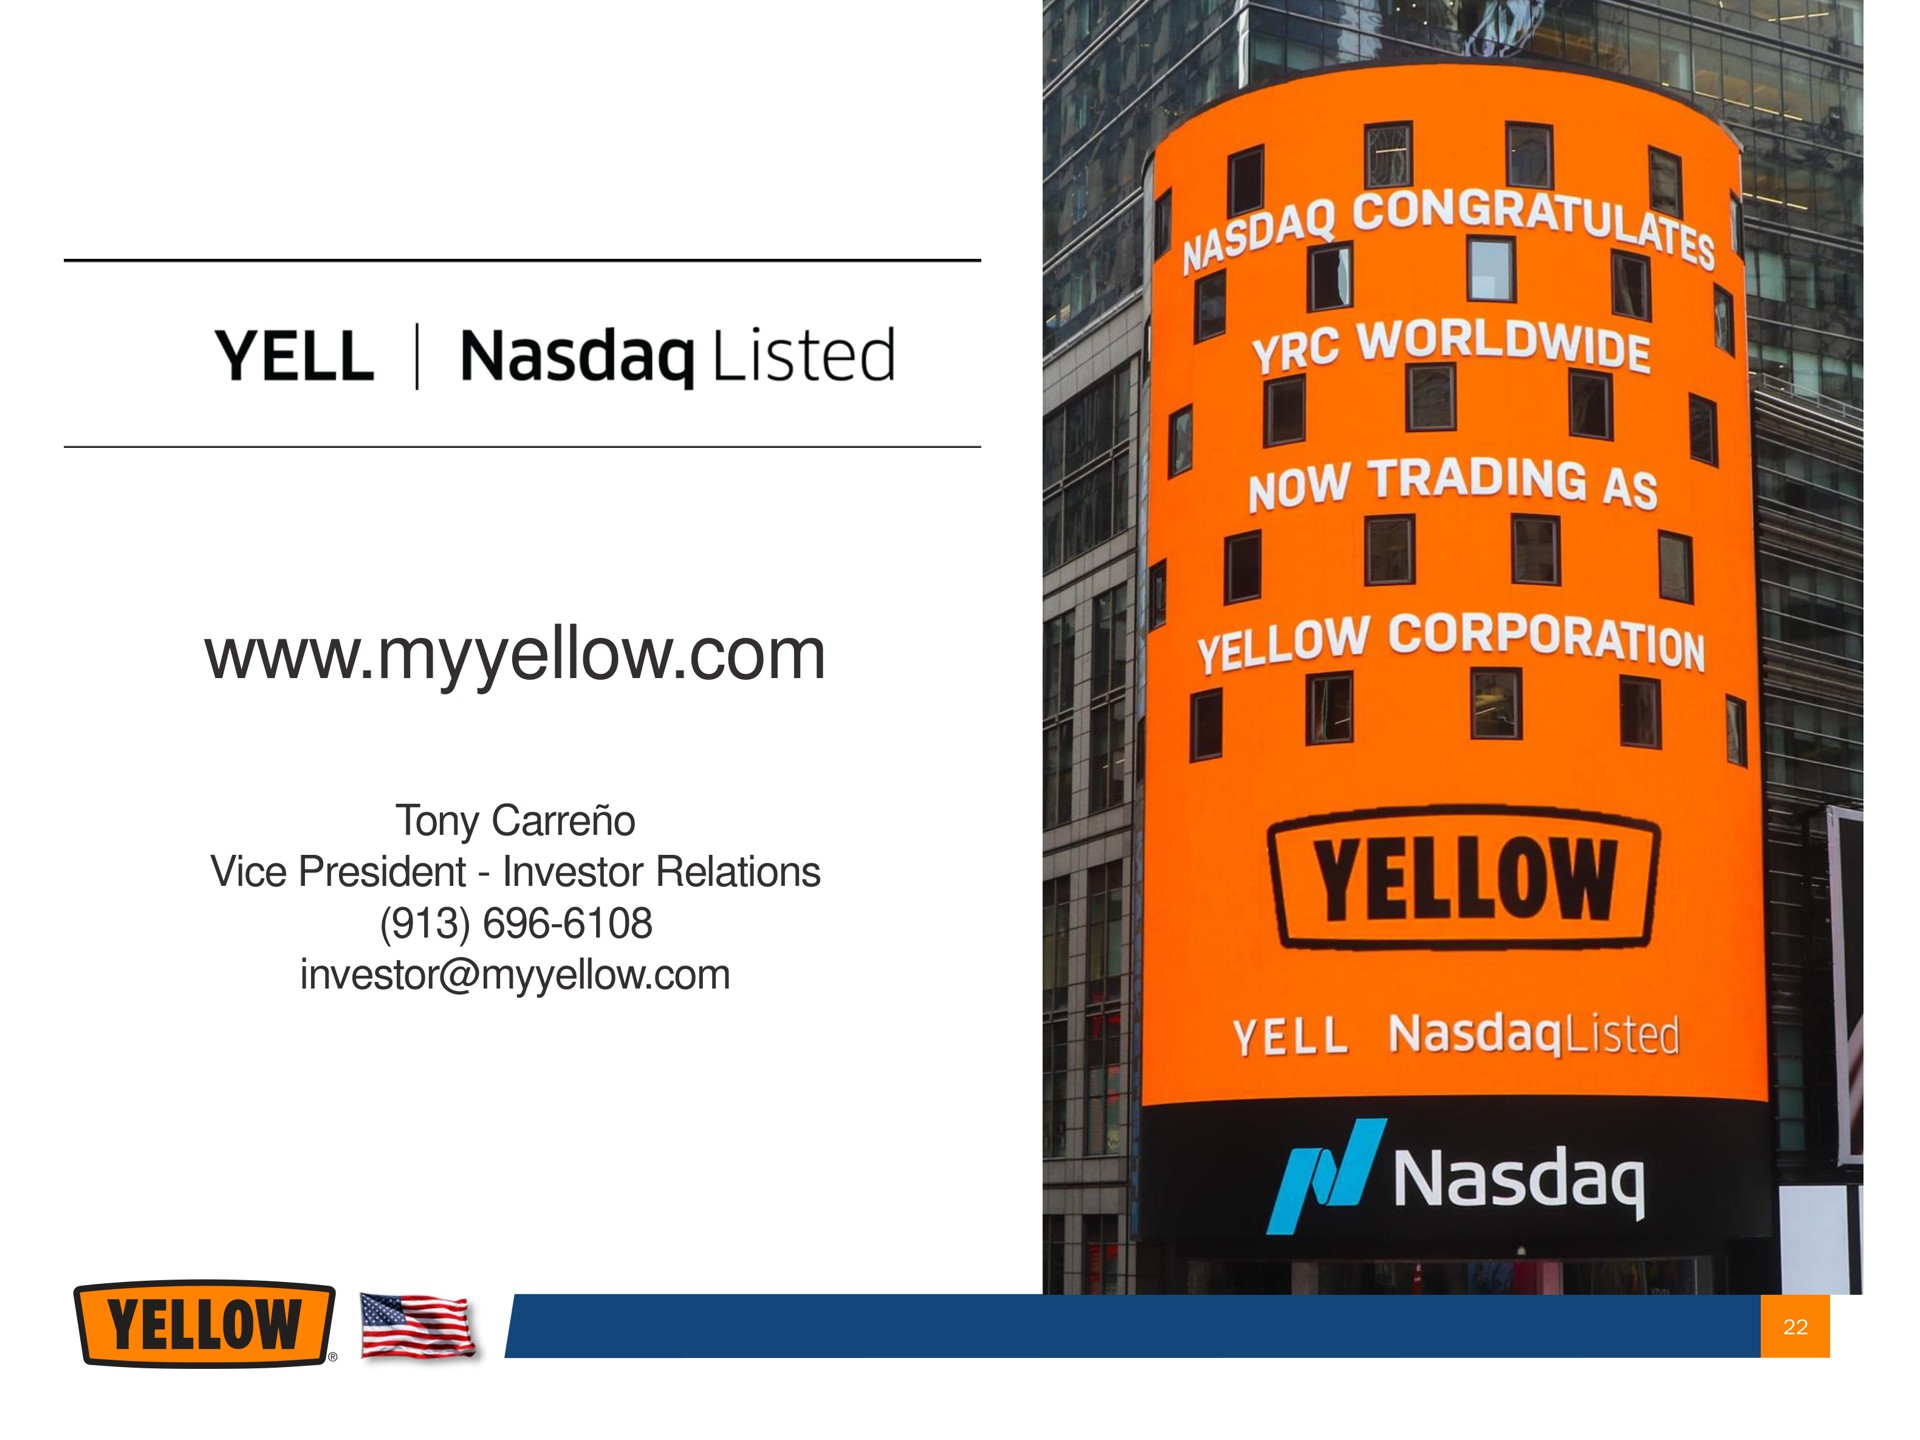 tony vice president investor relations investor i a yell listed yellow vell | Yellow Corporation